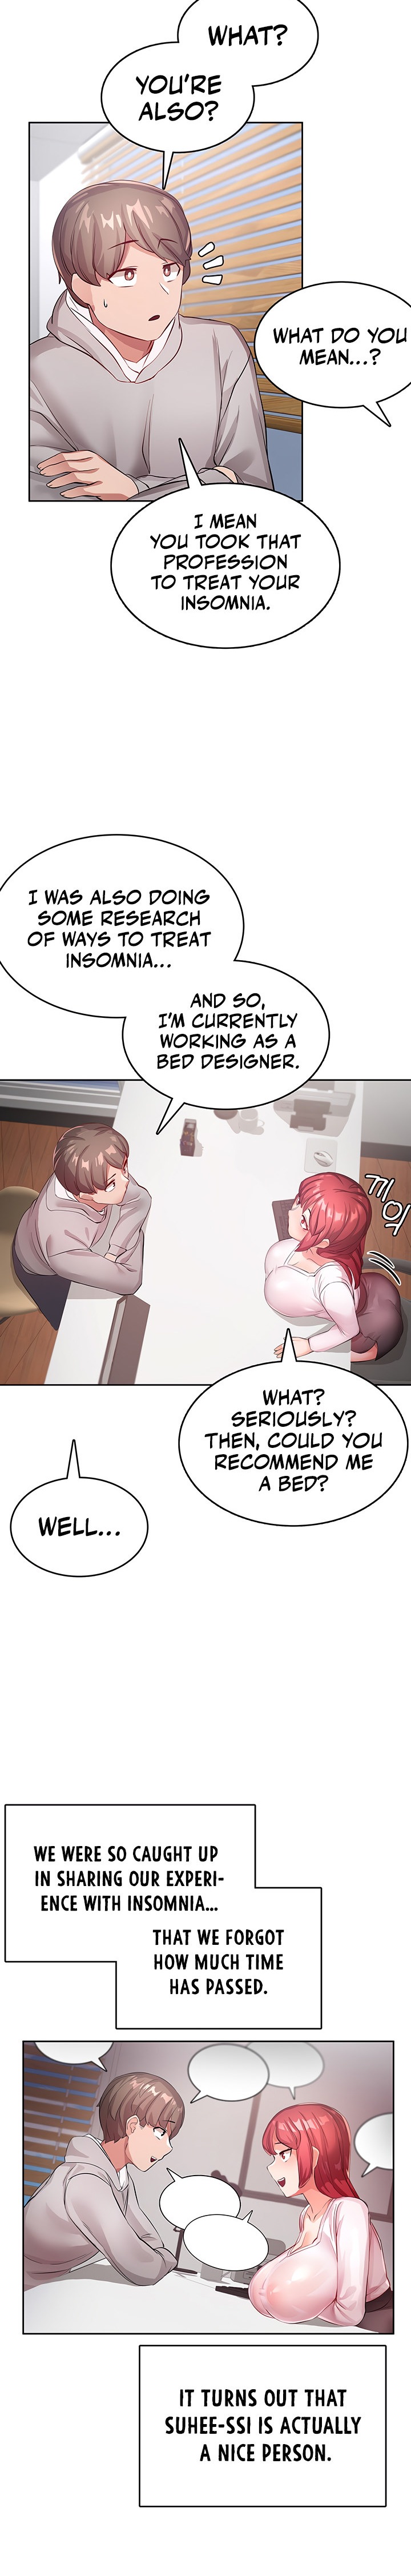 Relationship Reverse Button: Let’s Cure That Arrogant Girl - Chapter 1 Page 14